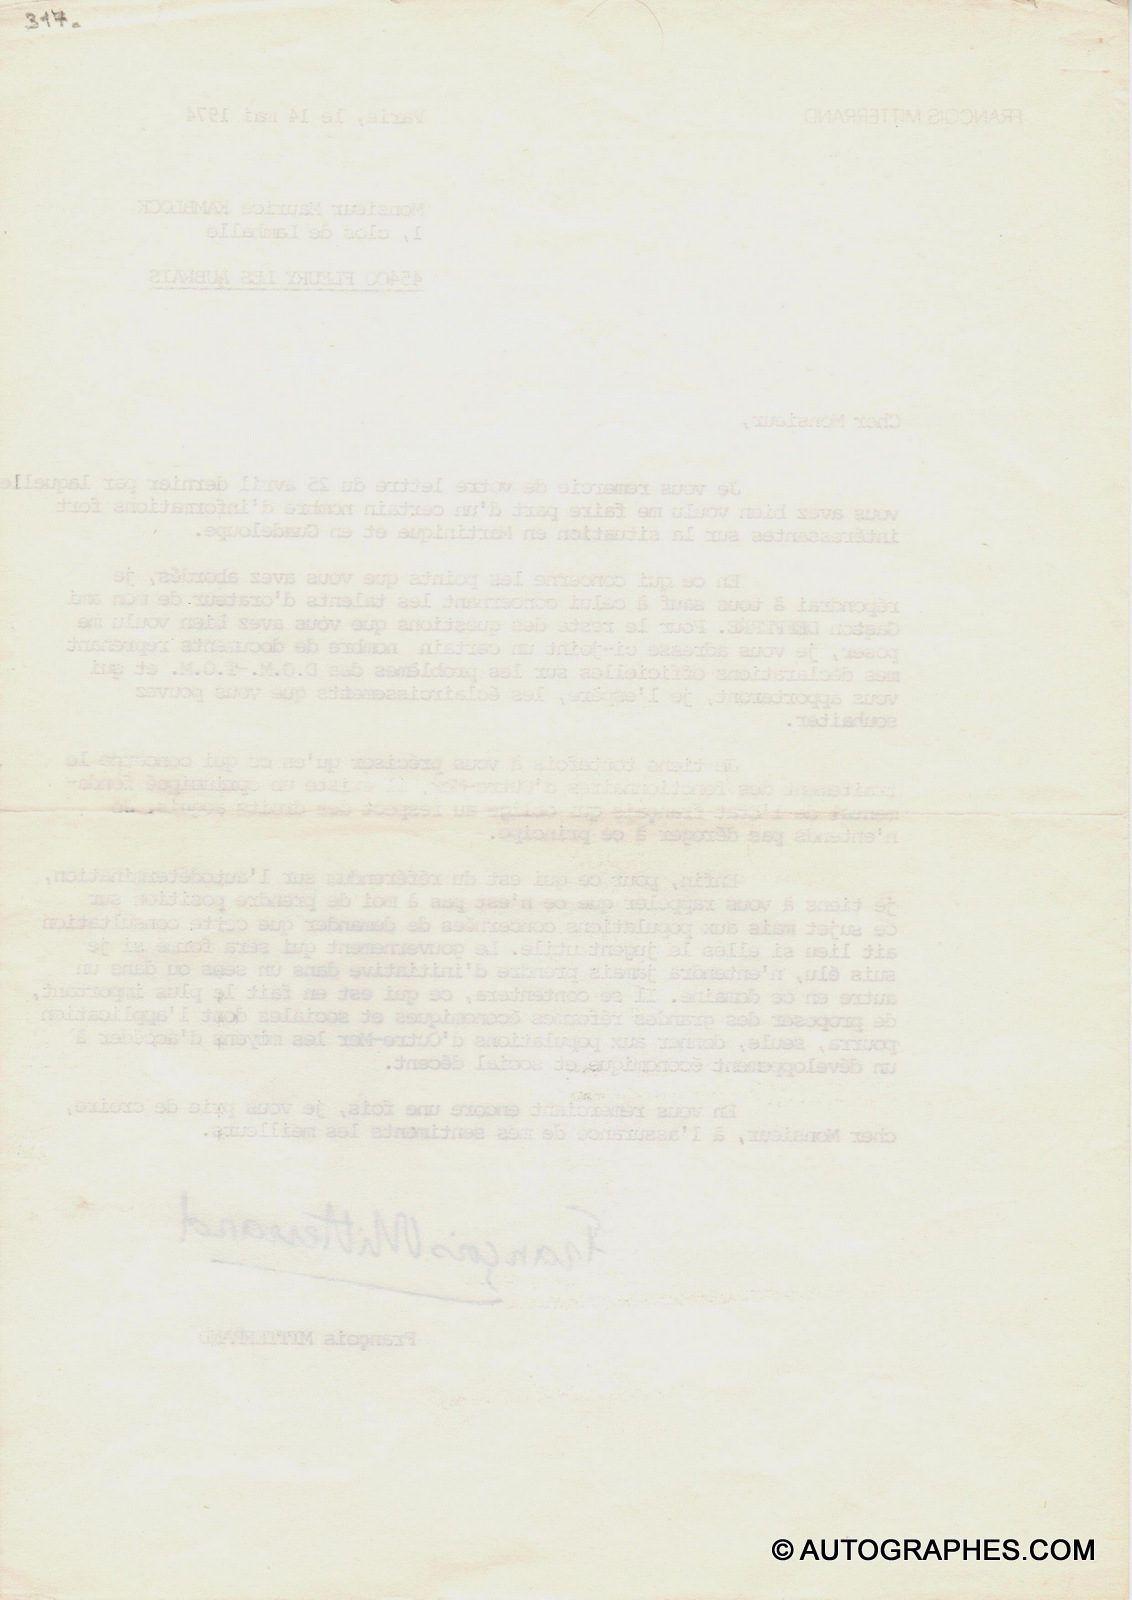 lettre-dactylographiee-signee-francois-mitterrand-mai-1974-2